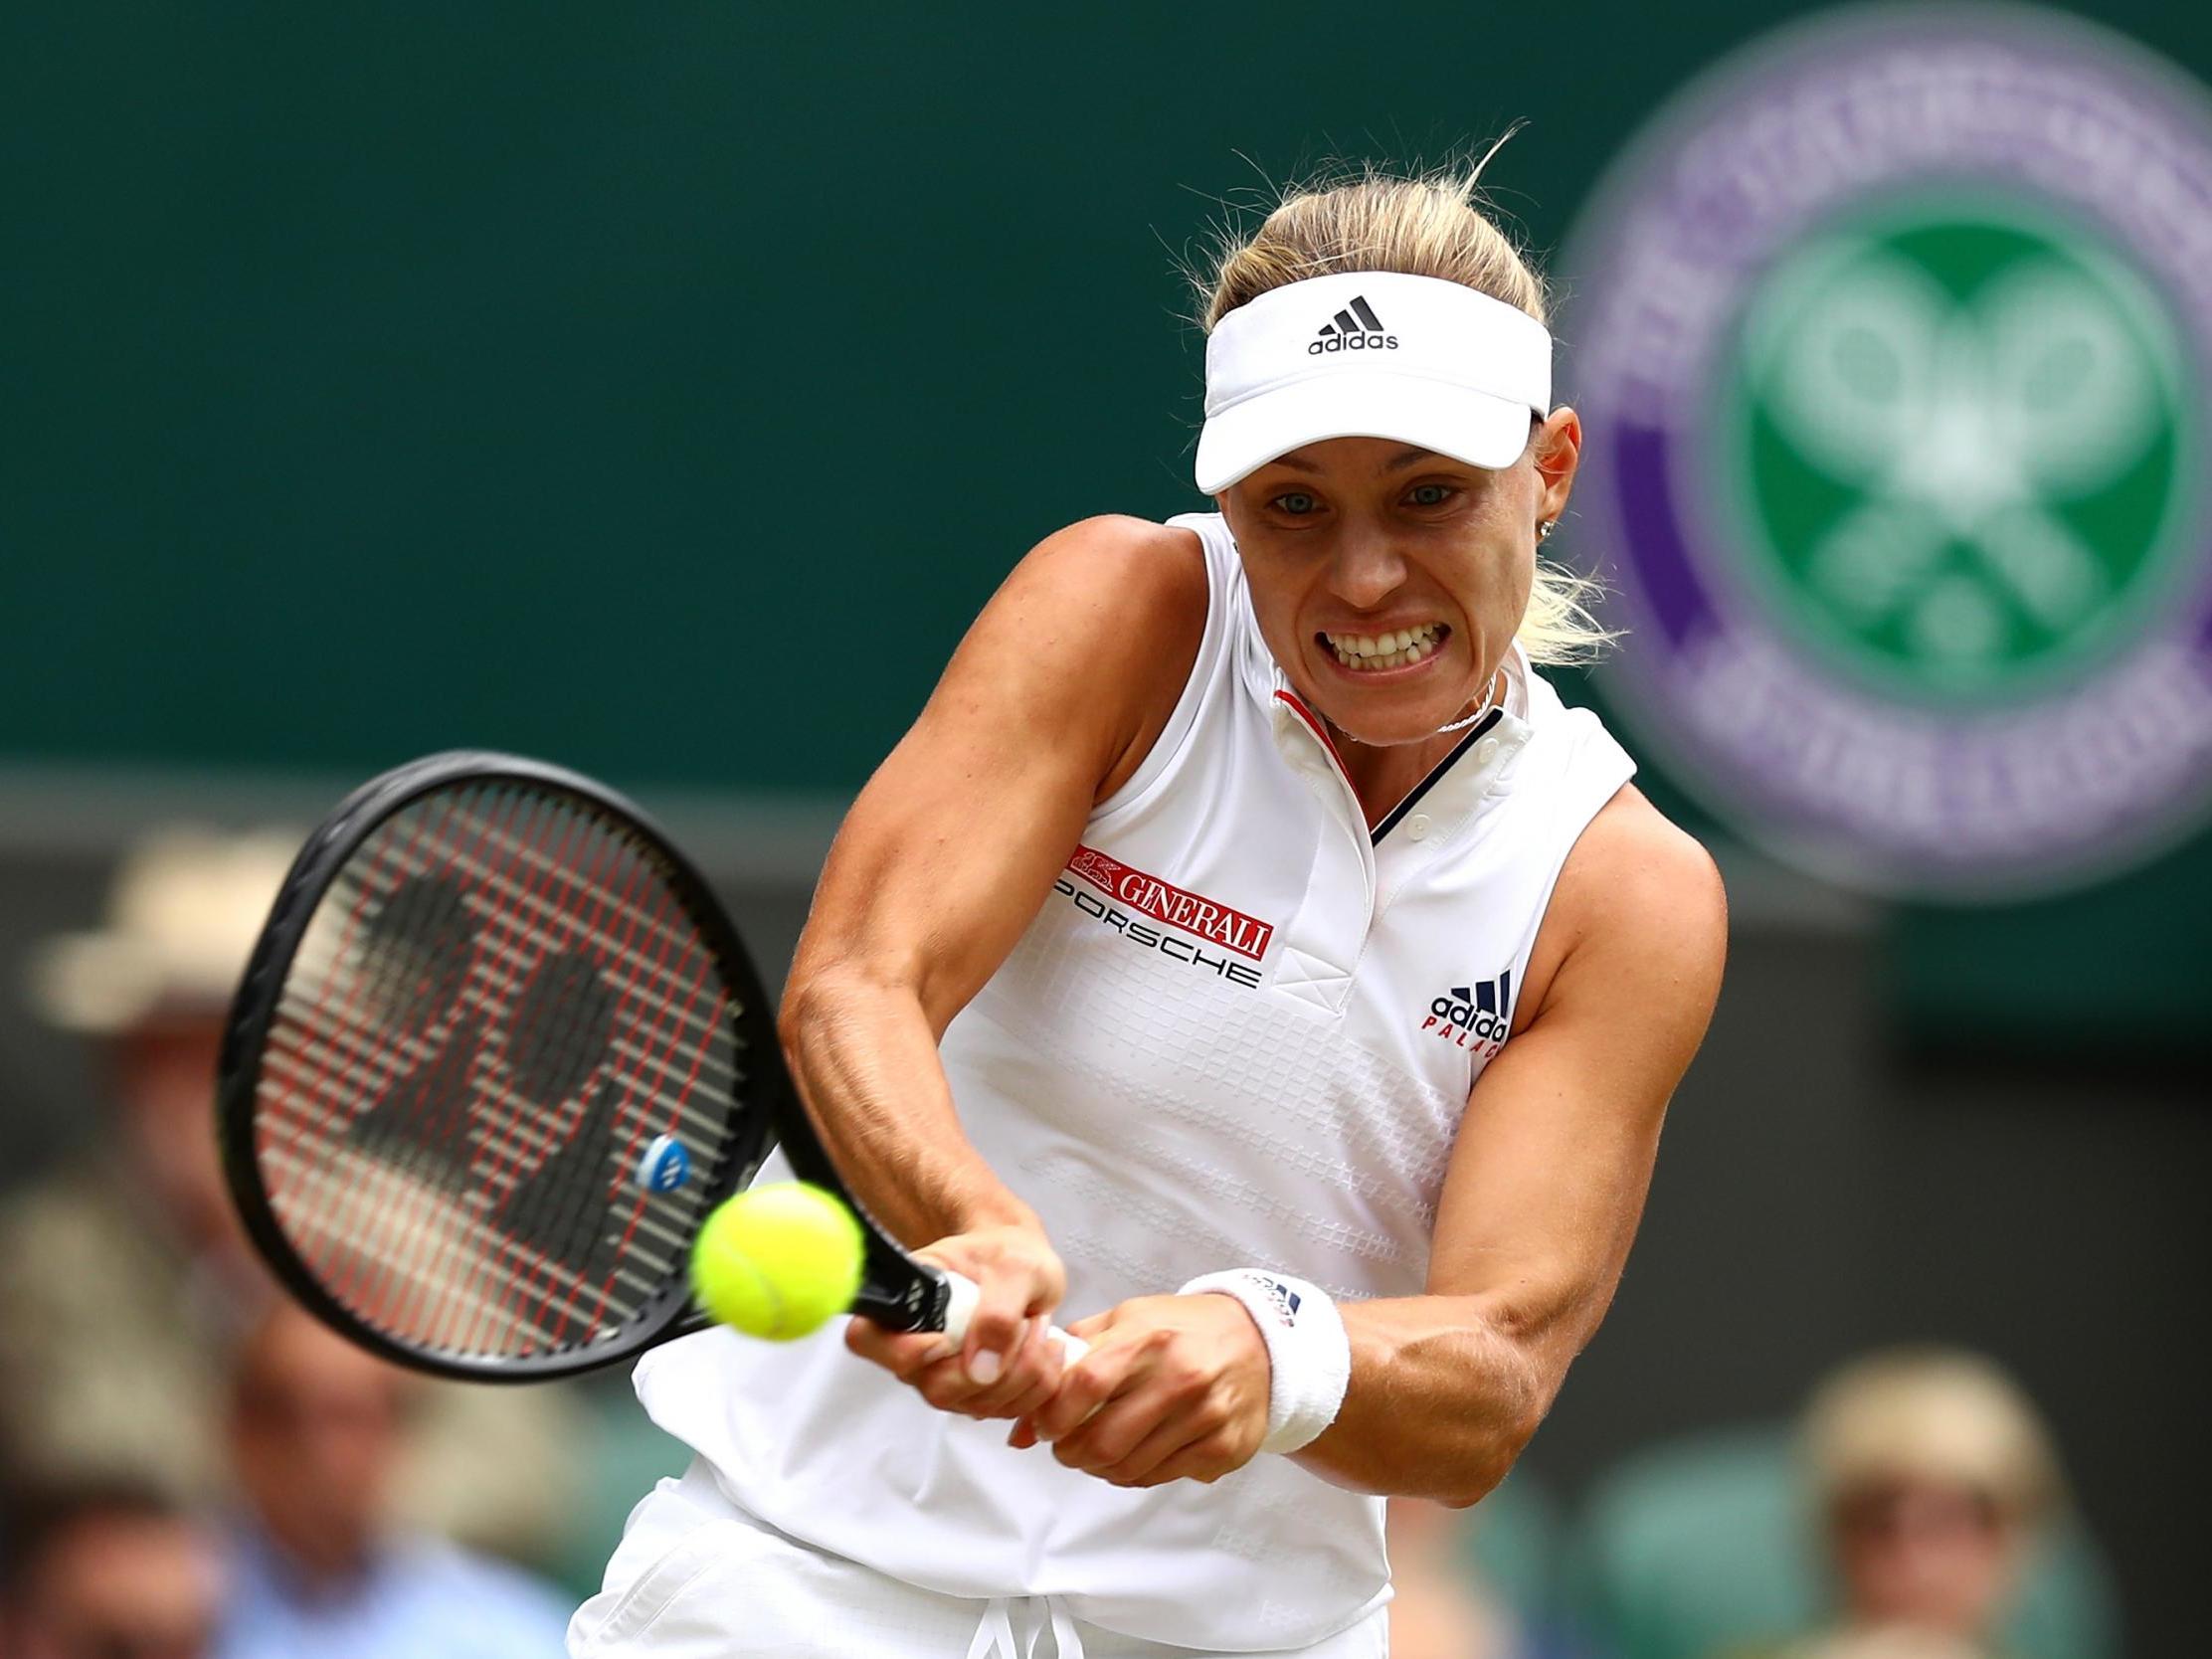 Kerber's experience could be enough to see her through to the final